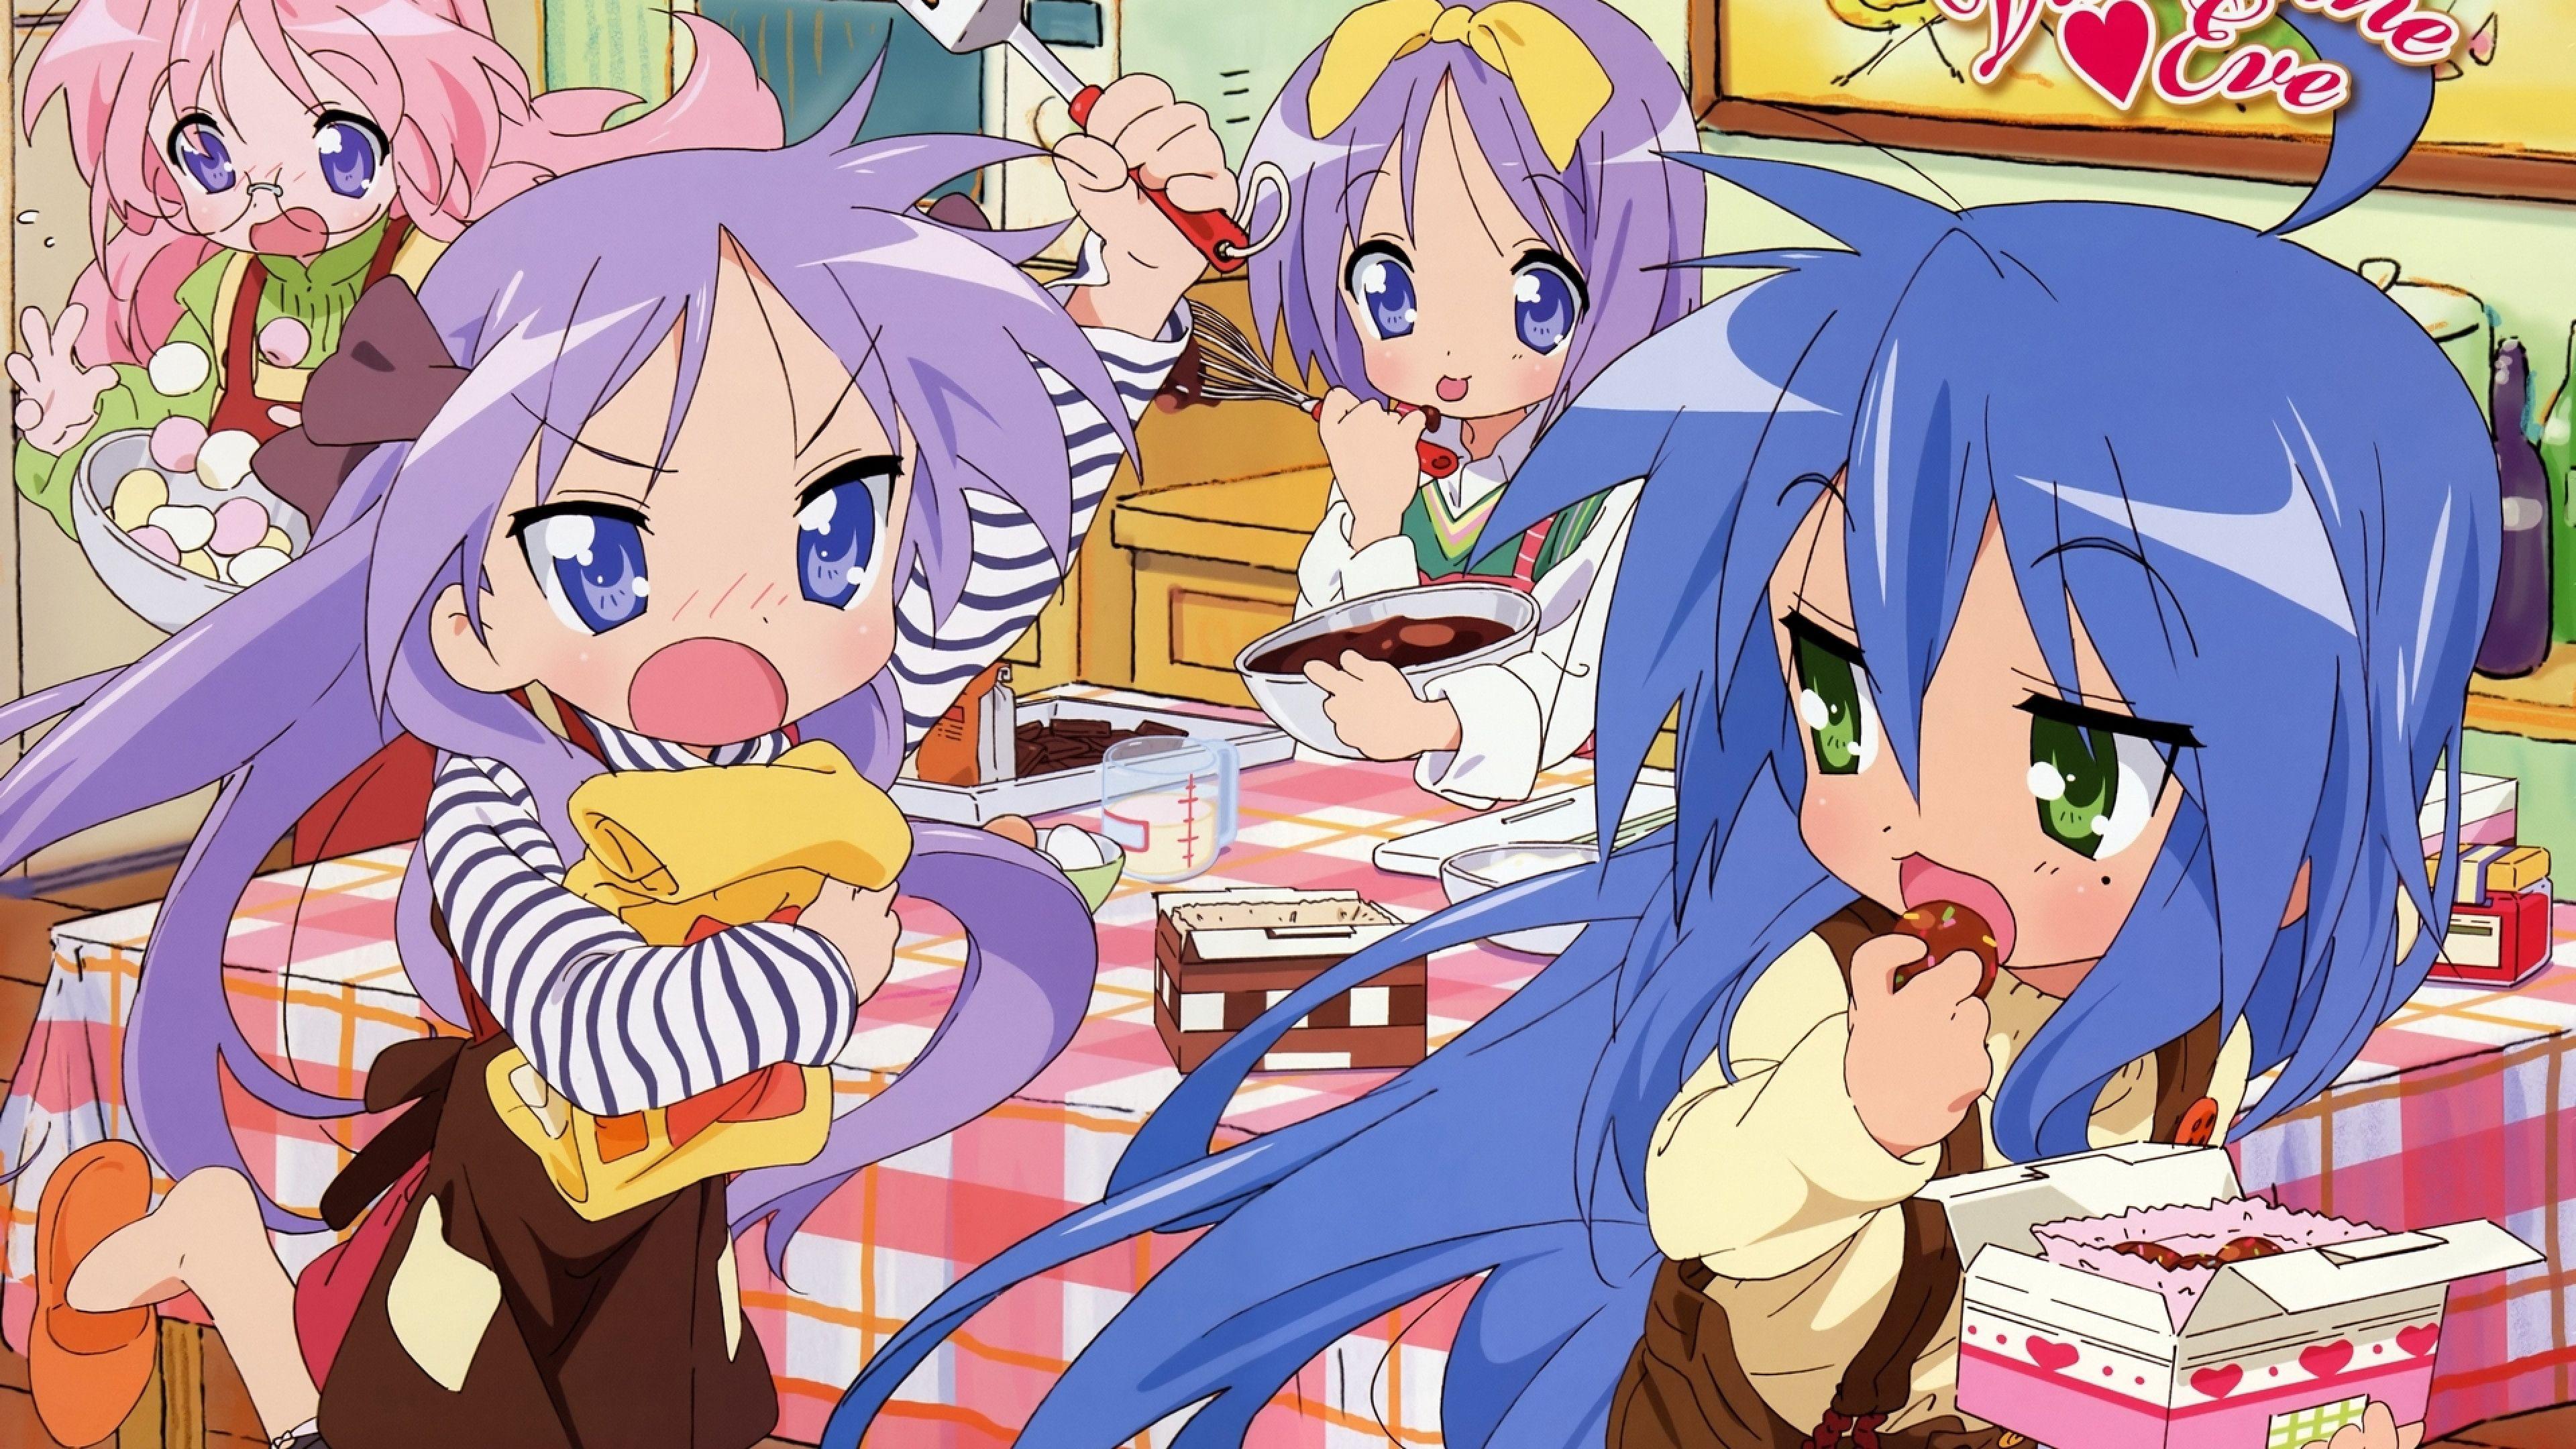 Lucky Star Anime Wallpapers Top Free Lucky Star Anime Backgrounds